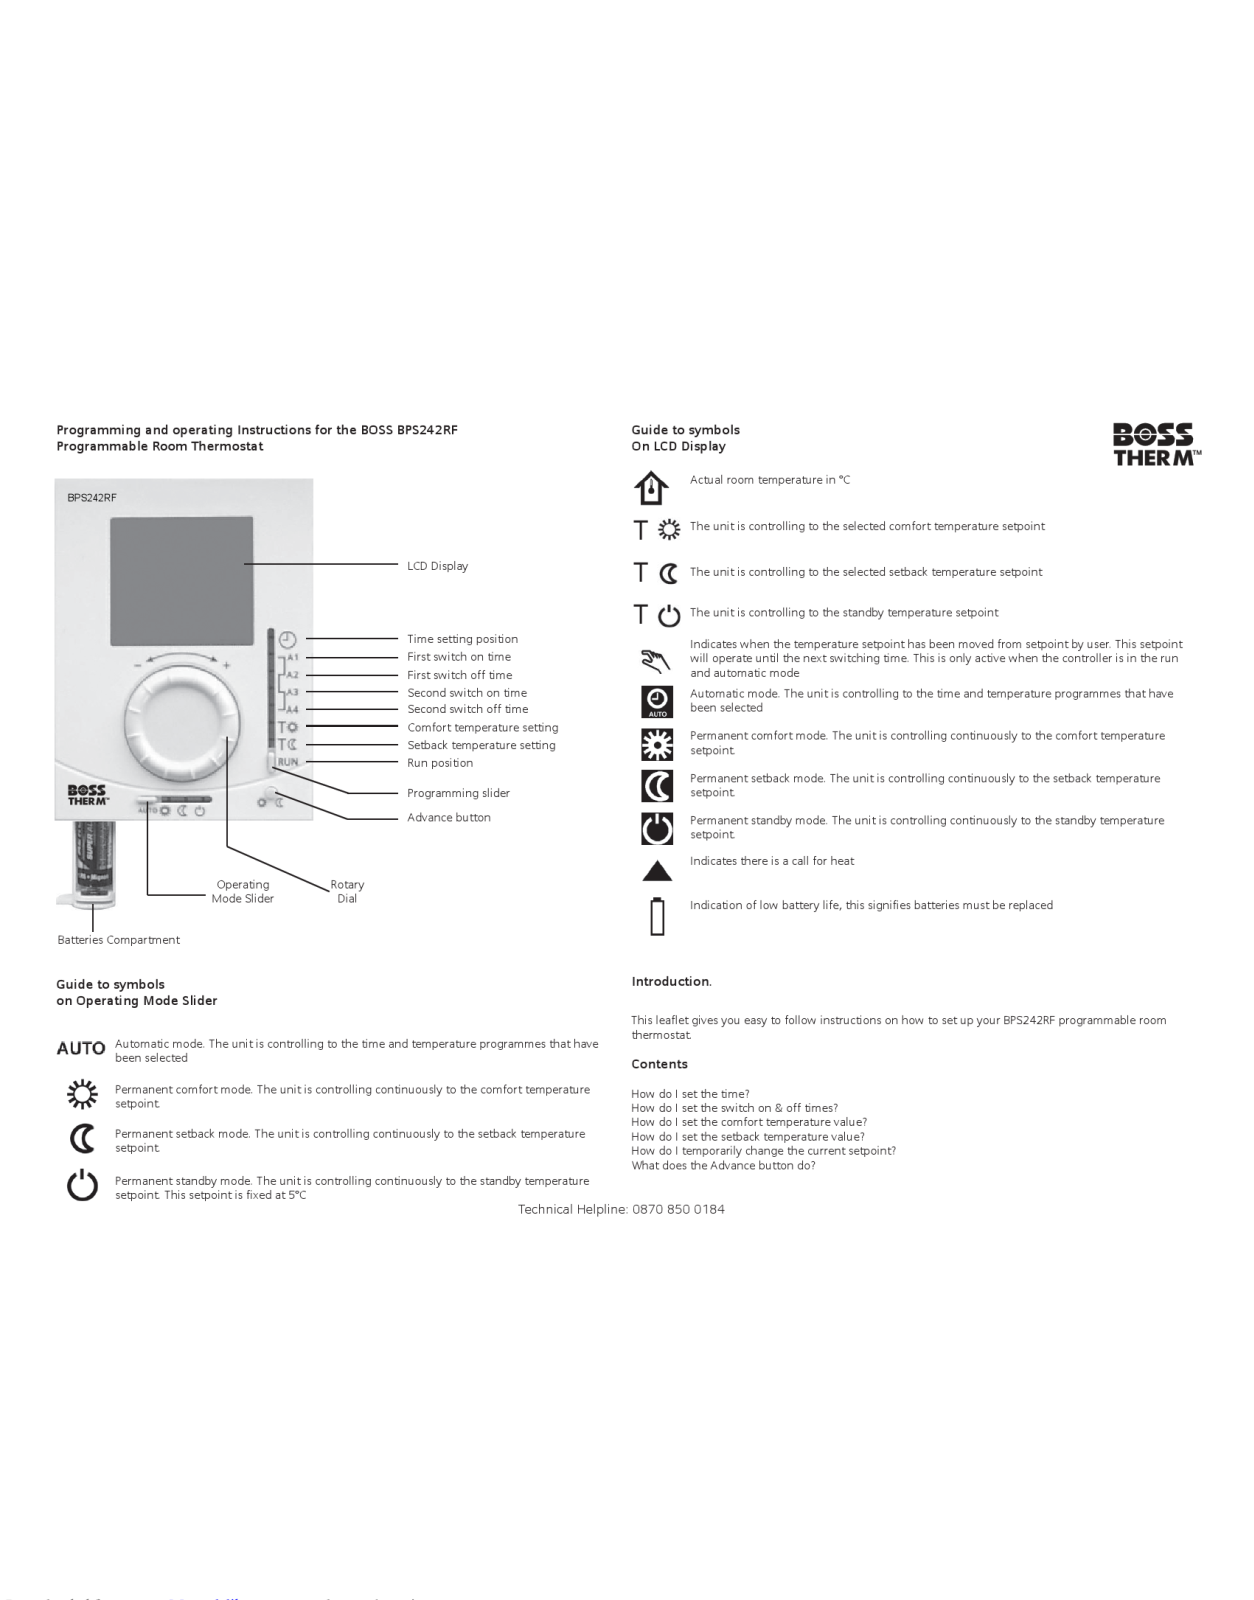 BOSS BPS242RF Programming and operating instructions